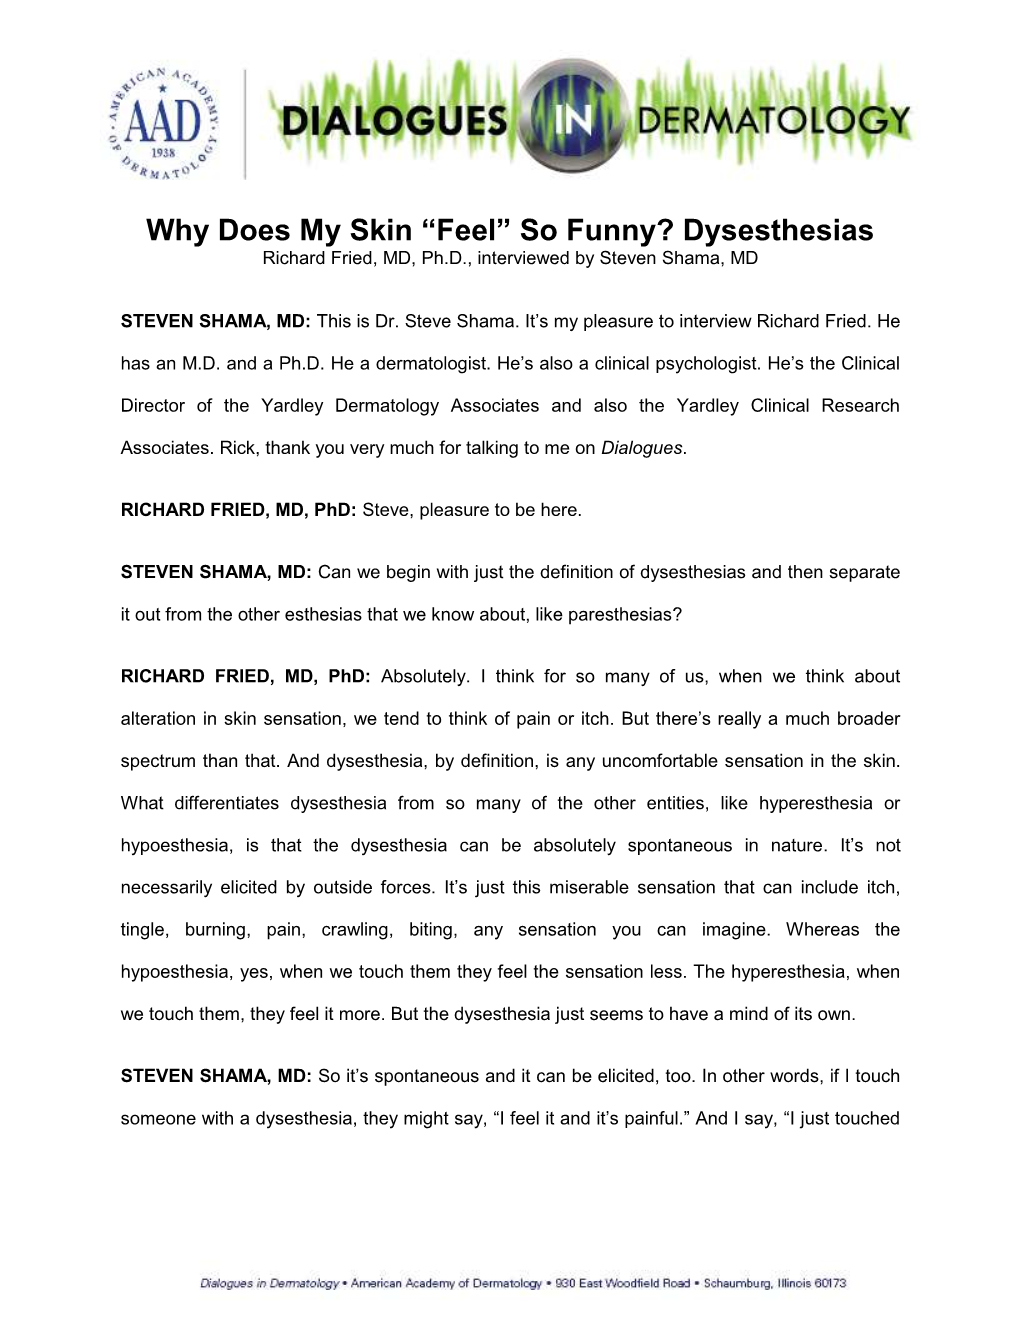 Why Does My Skin “Feel” So Funny? Dysesthesias Richard Fried, MD, Ph.D., Interviewed by Steven Shama, MD